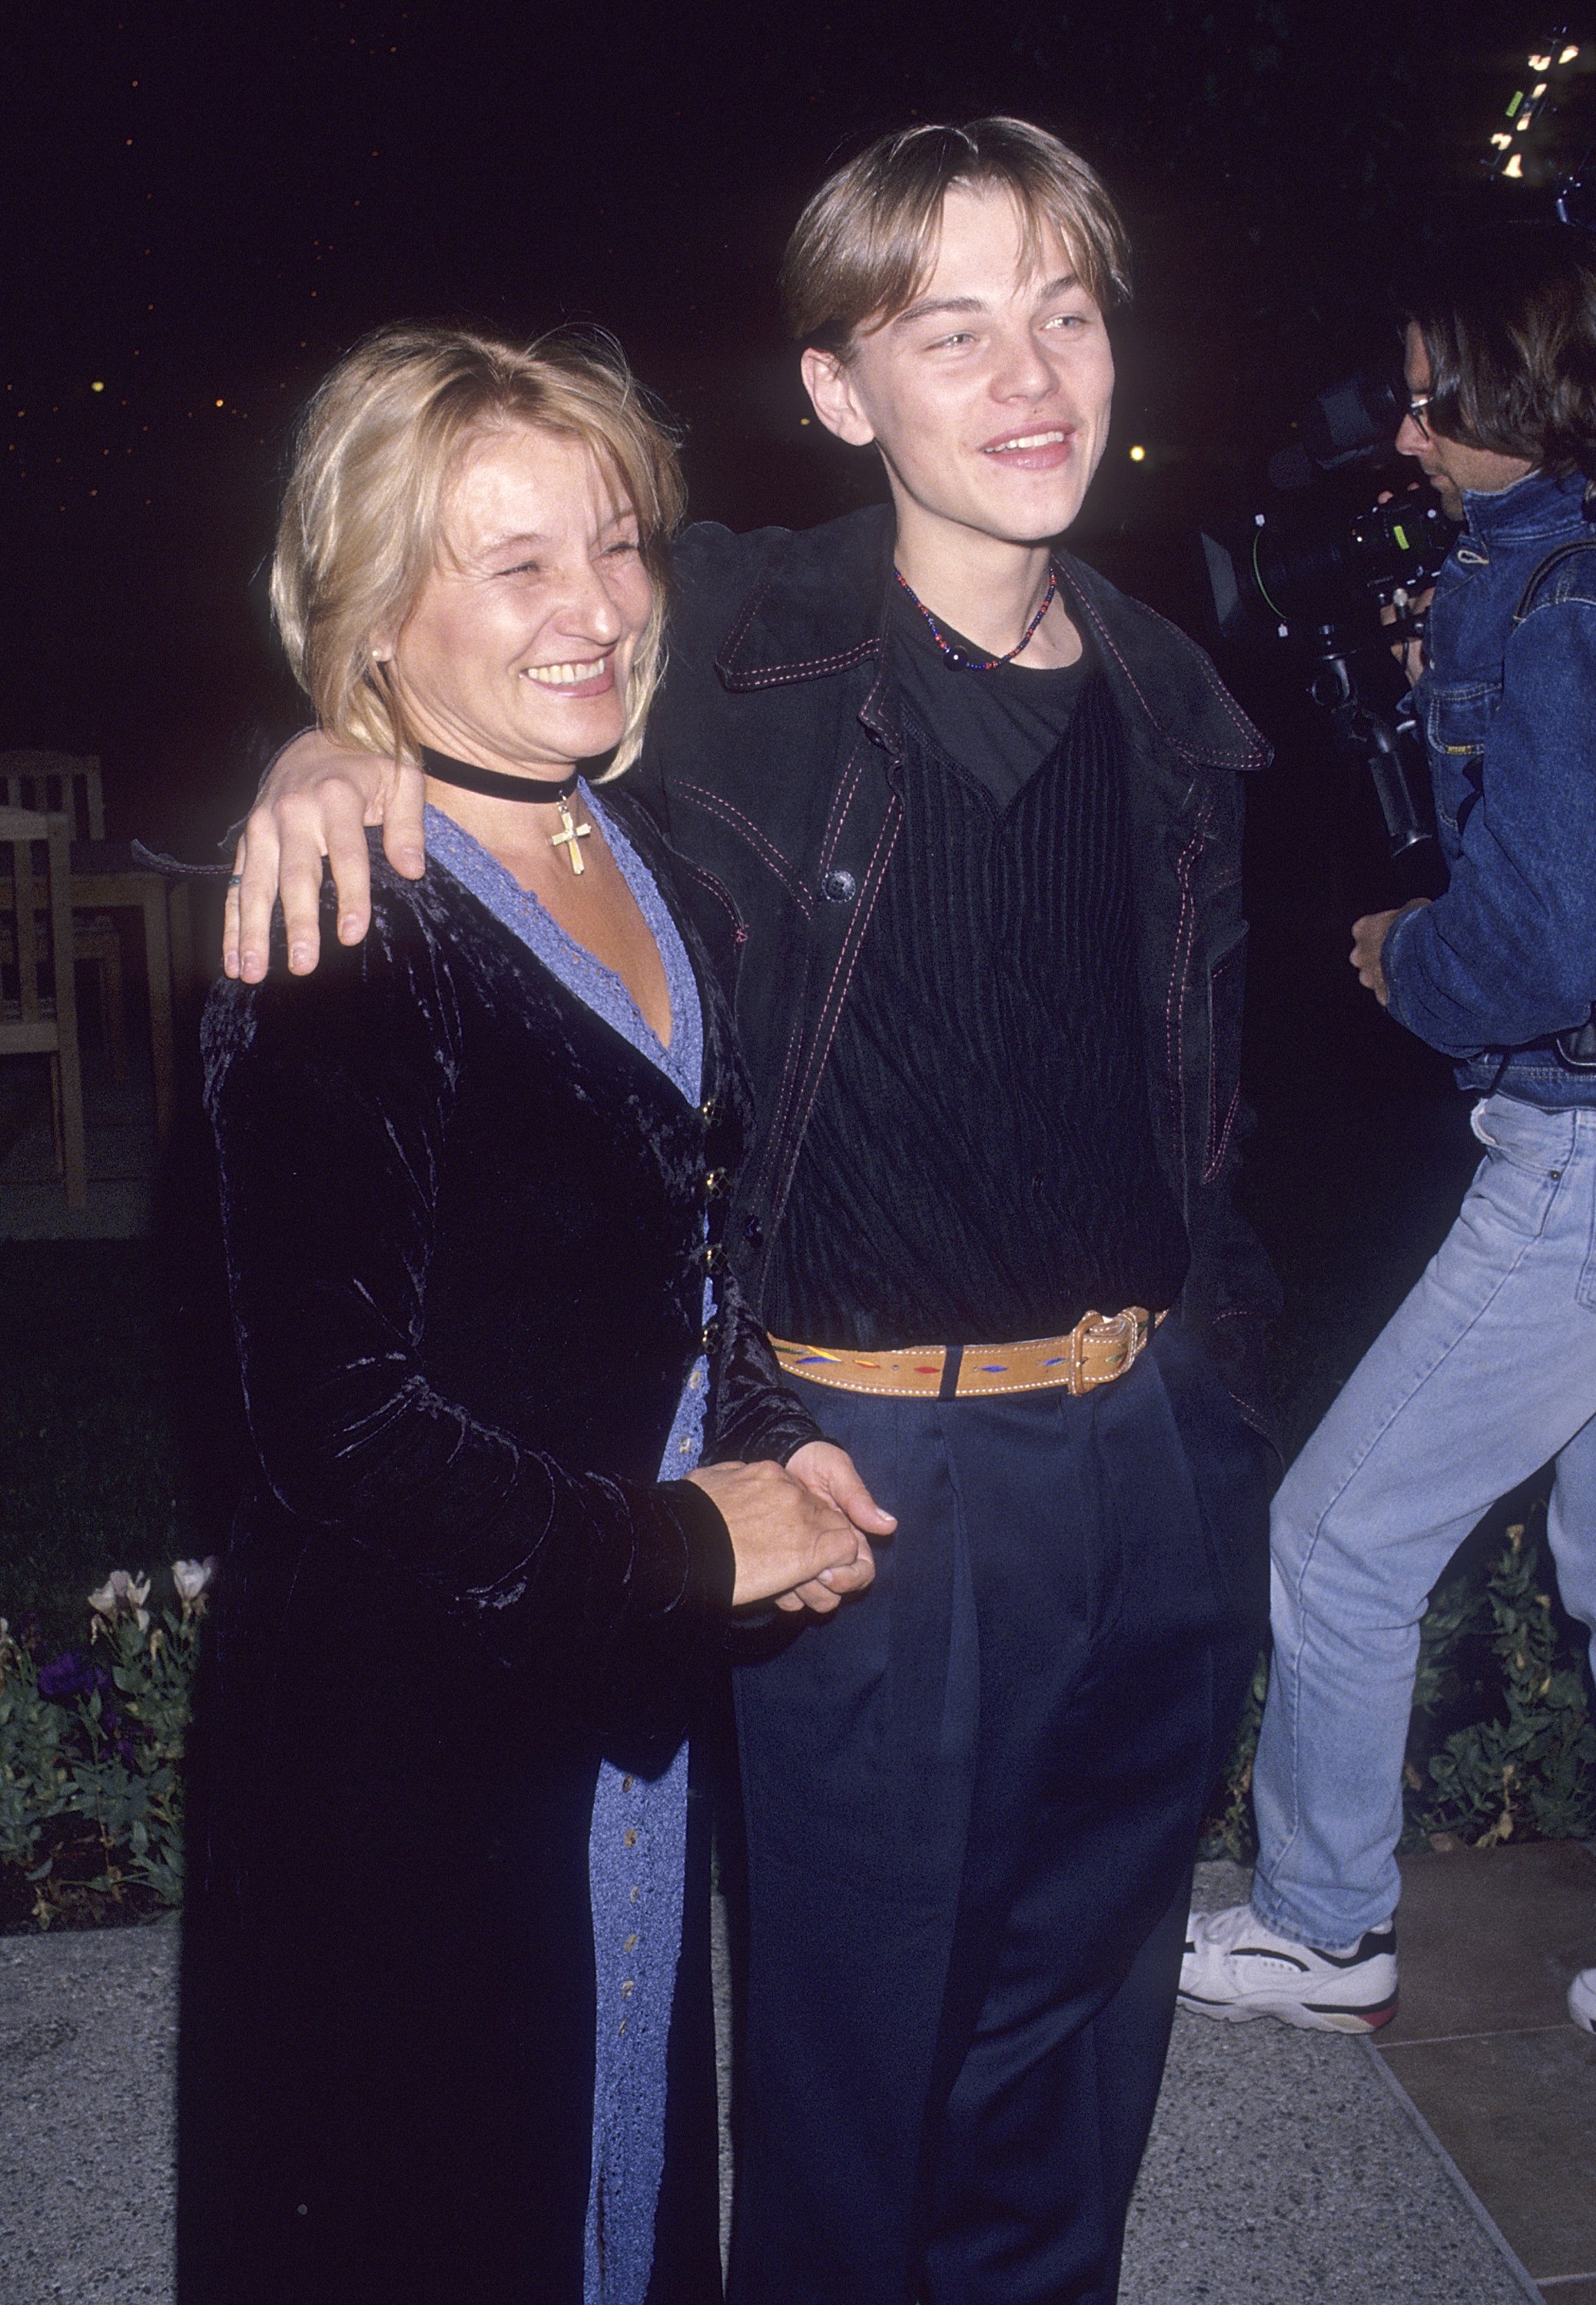 Leonardo DiCaprio and mother Irmelin Indenbirken attend the "What's Eating Gilbert Grape" Hollywood Premiere on December 12, 1993 at Paramount Theatre, Paramount Pictures Studios in Hollywood, California  | Source: Getty Images